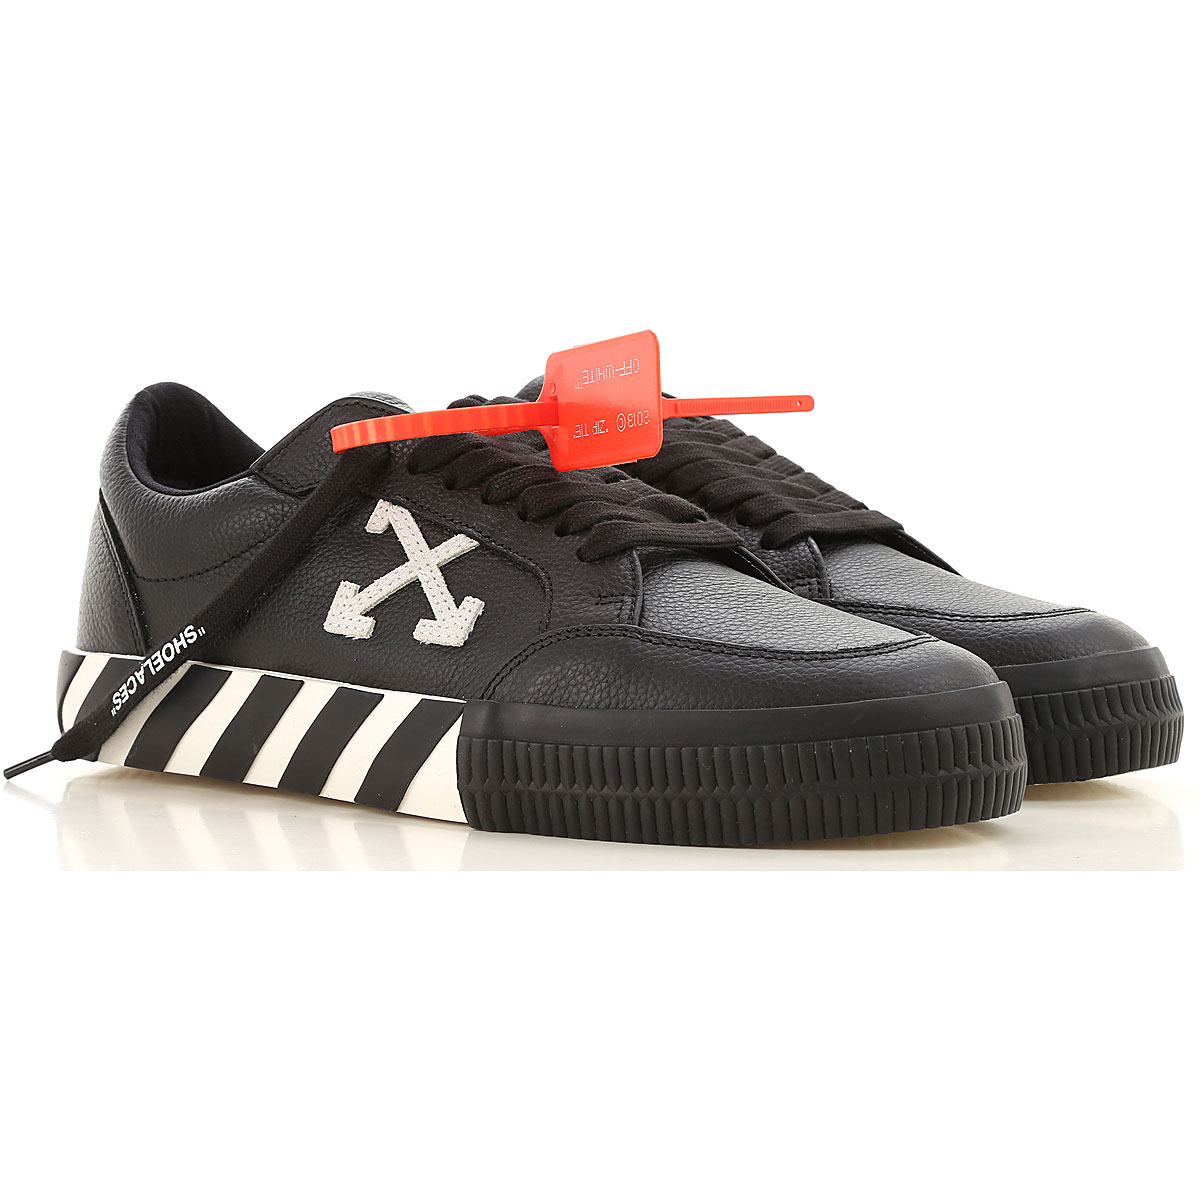 Mens Shoes OffWhite Virgil Abloh, Style code 0mia085f19d680011001